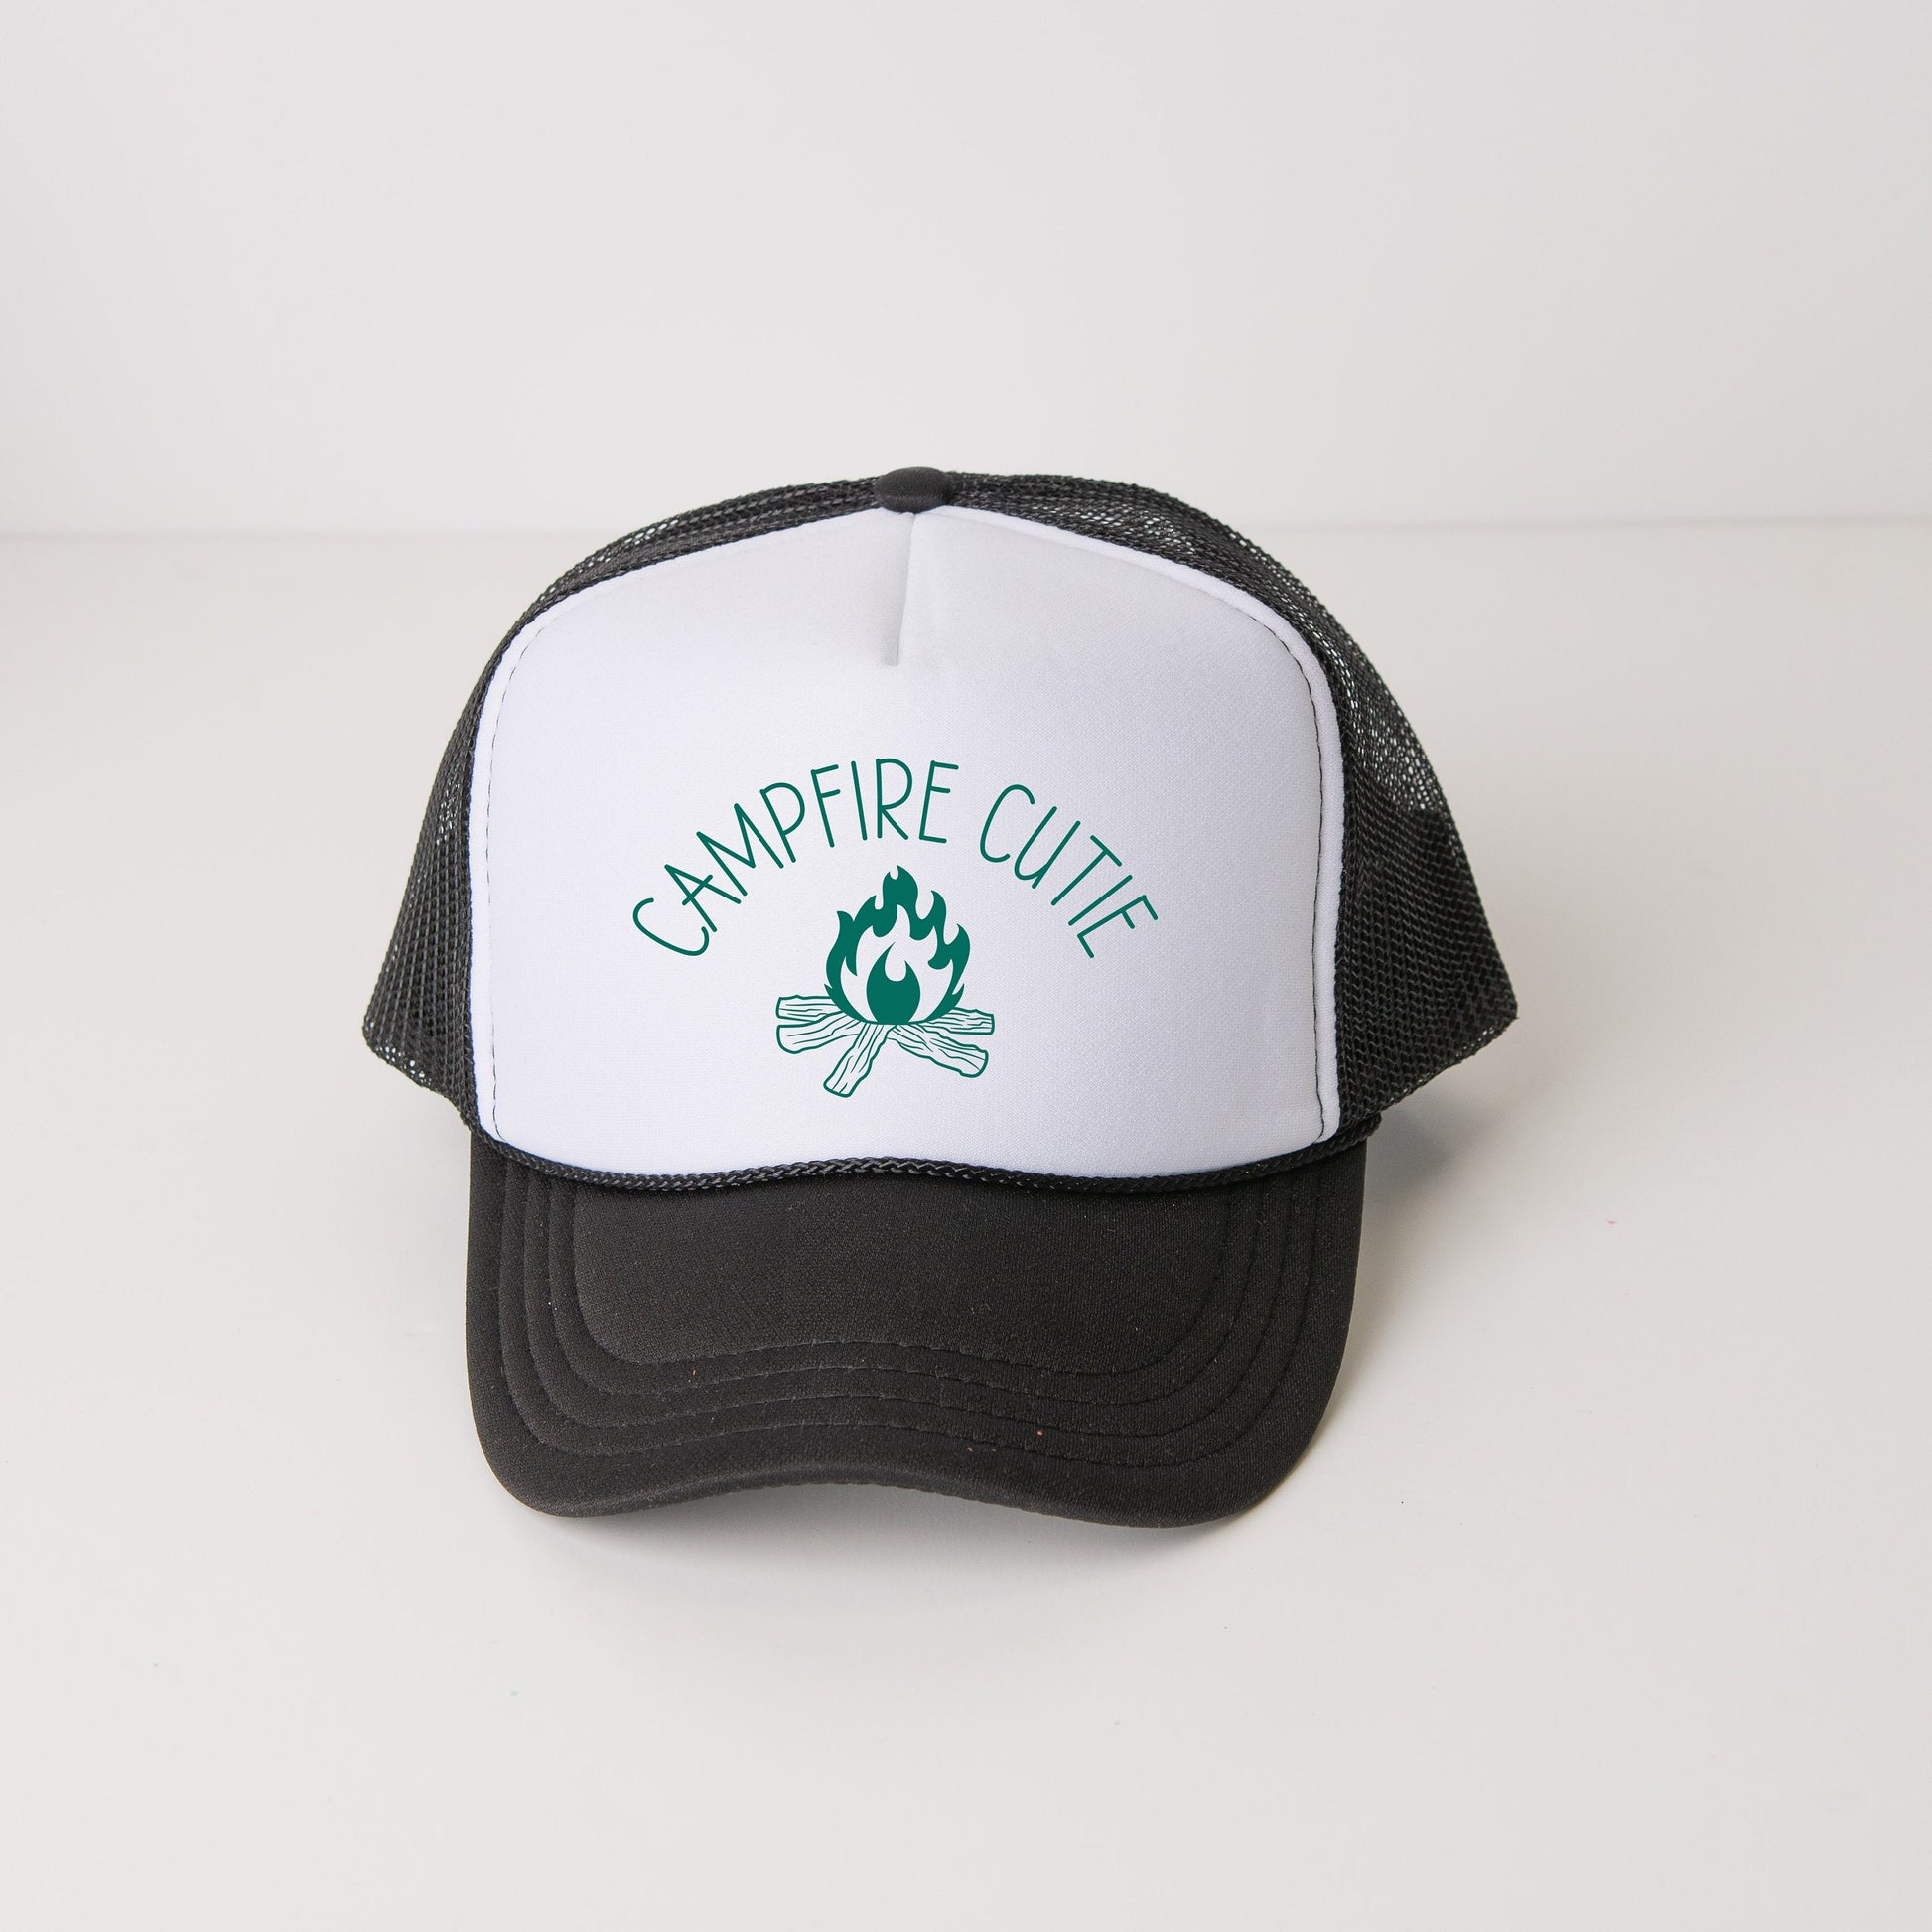 a black and white trucker hat with a campfire cute logo